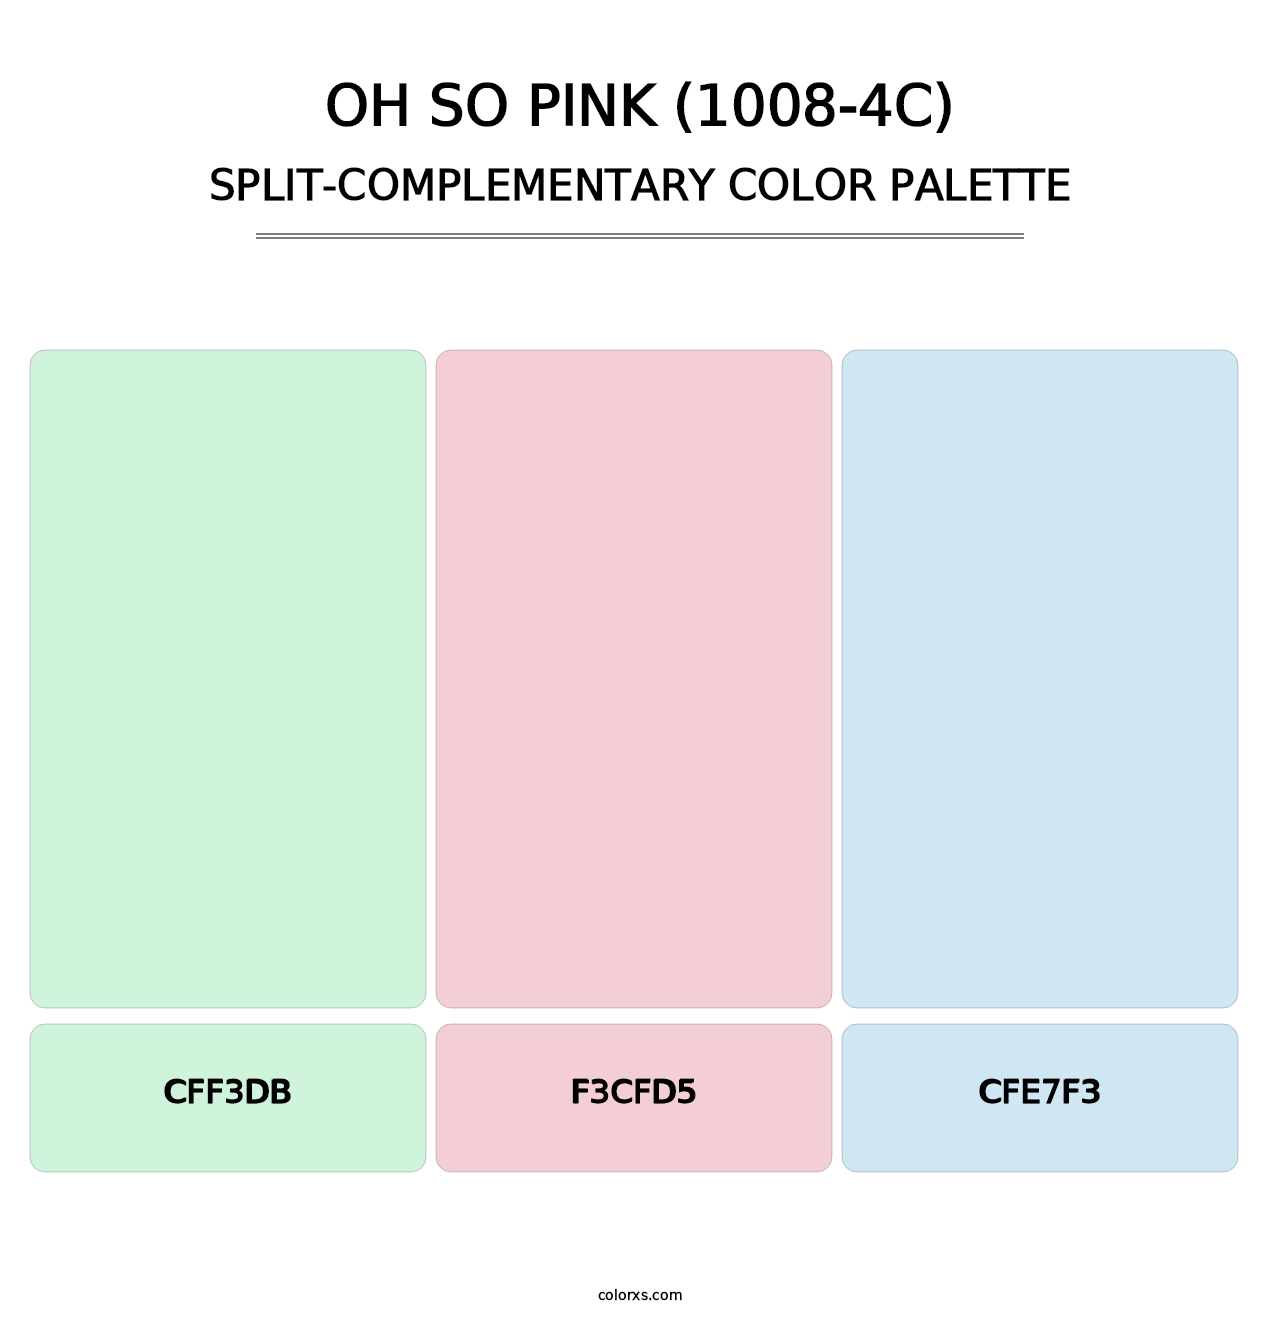 Oh So Pink (1008-4C) - Split-Complementary Color Palette